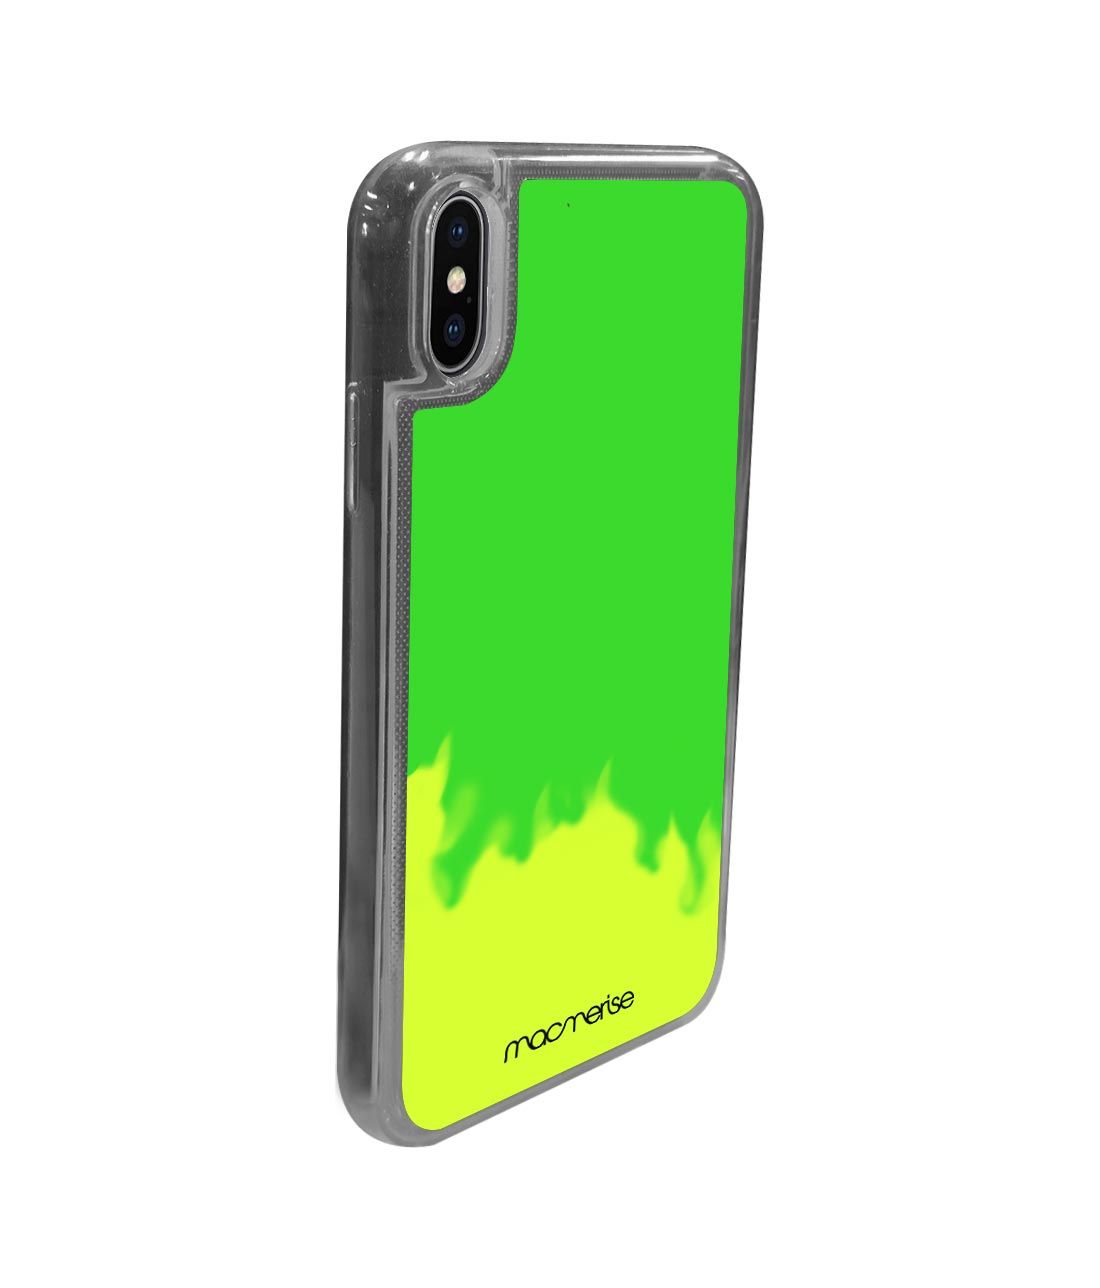 Neon Sand Green - Neon Sand Phone Case for iPhone XS